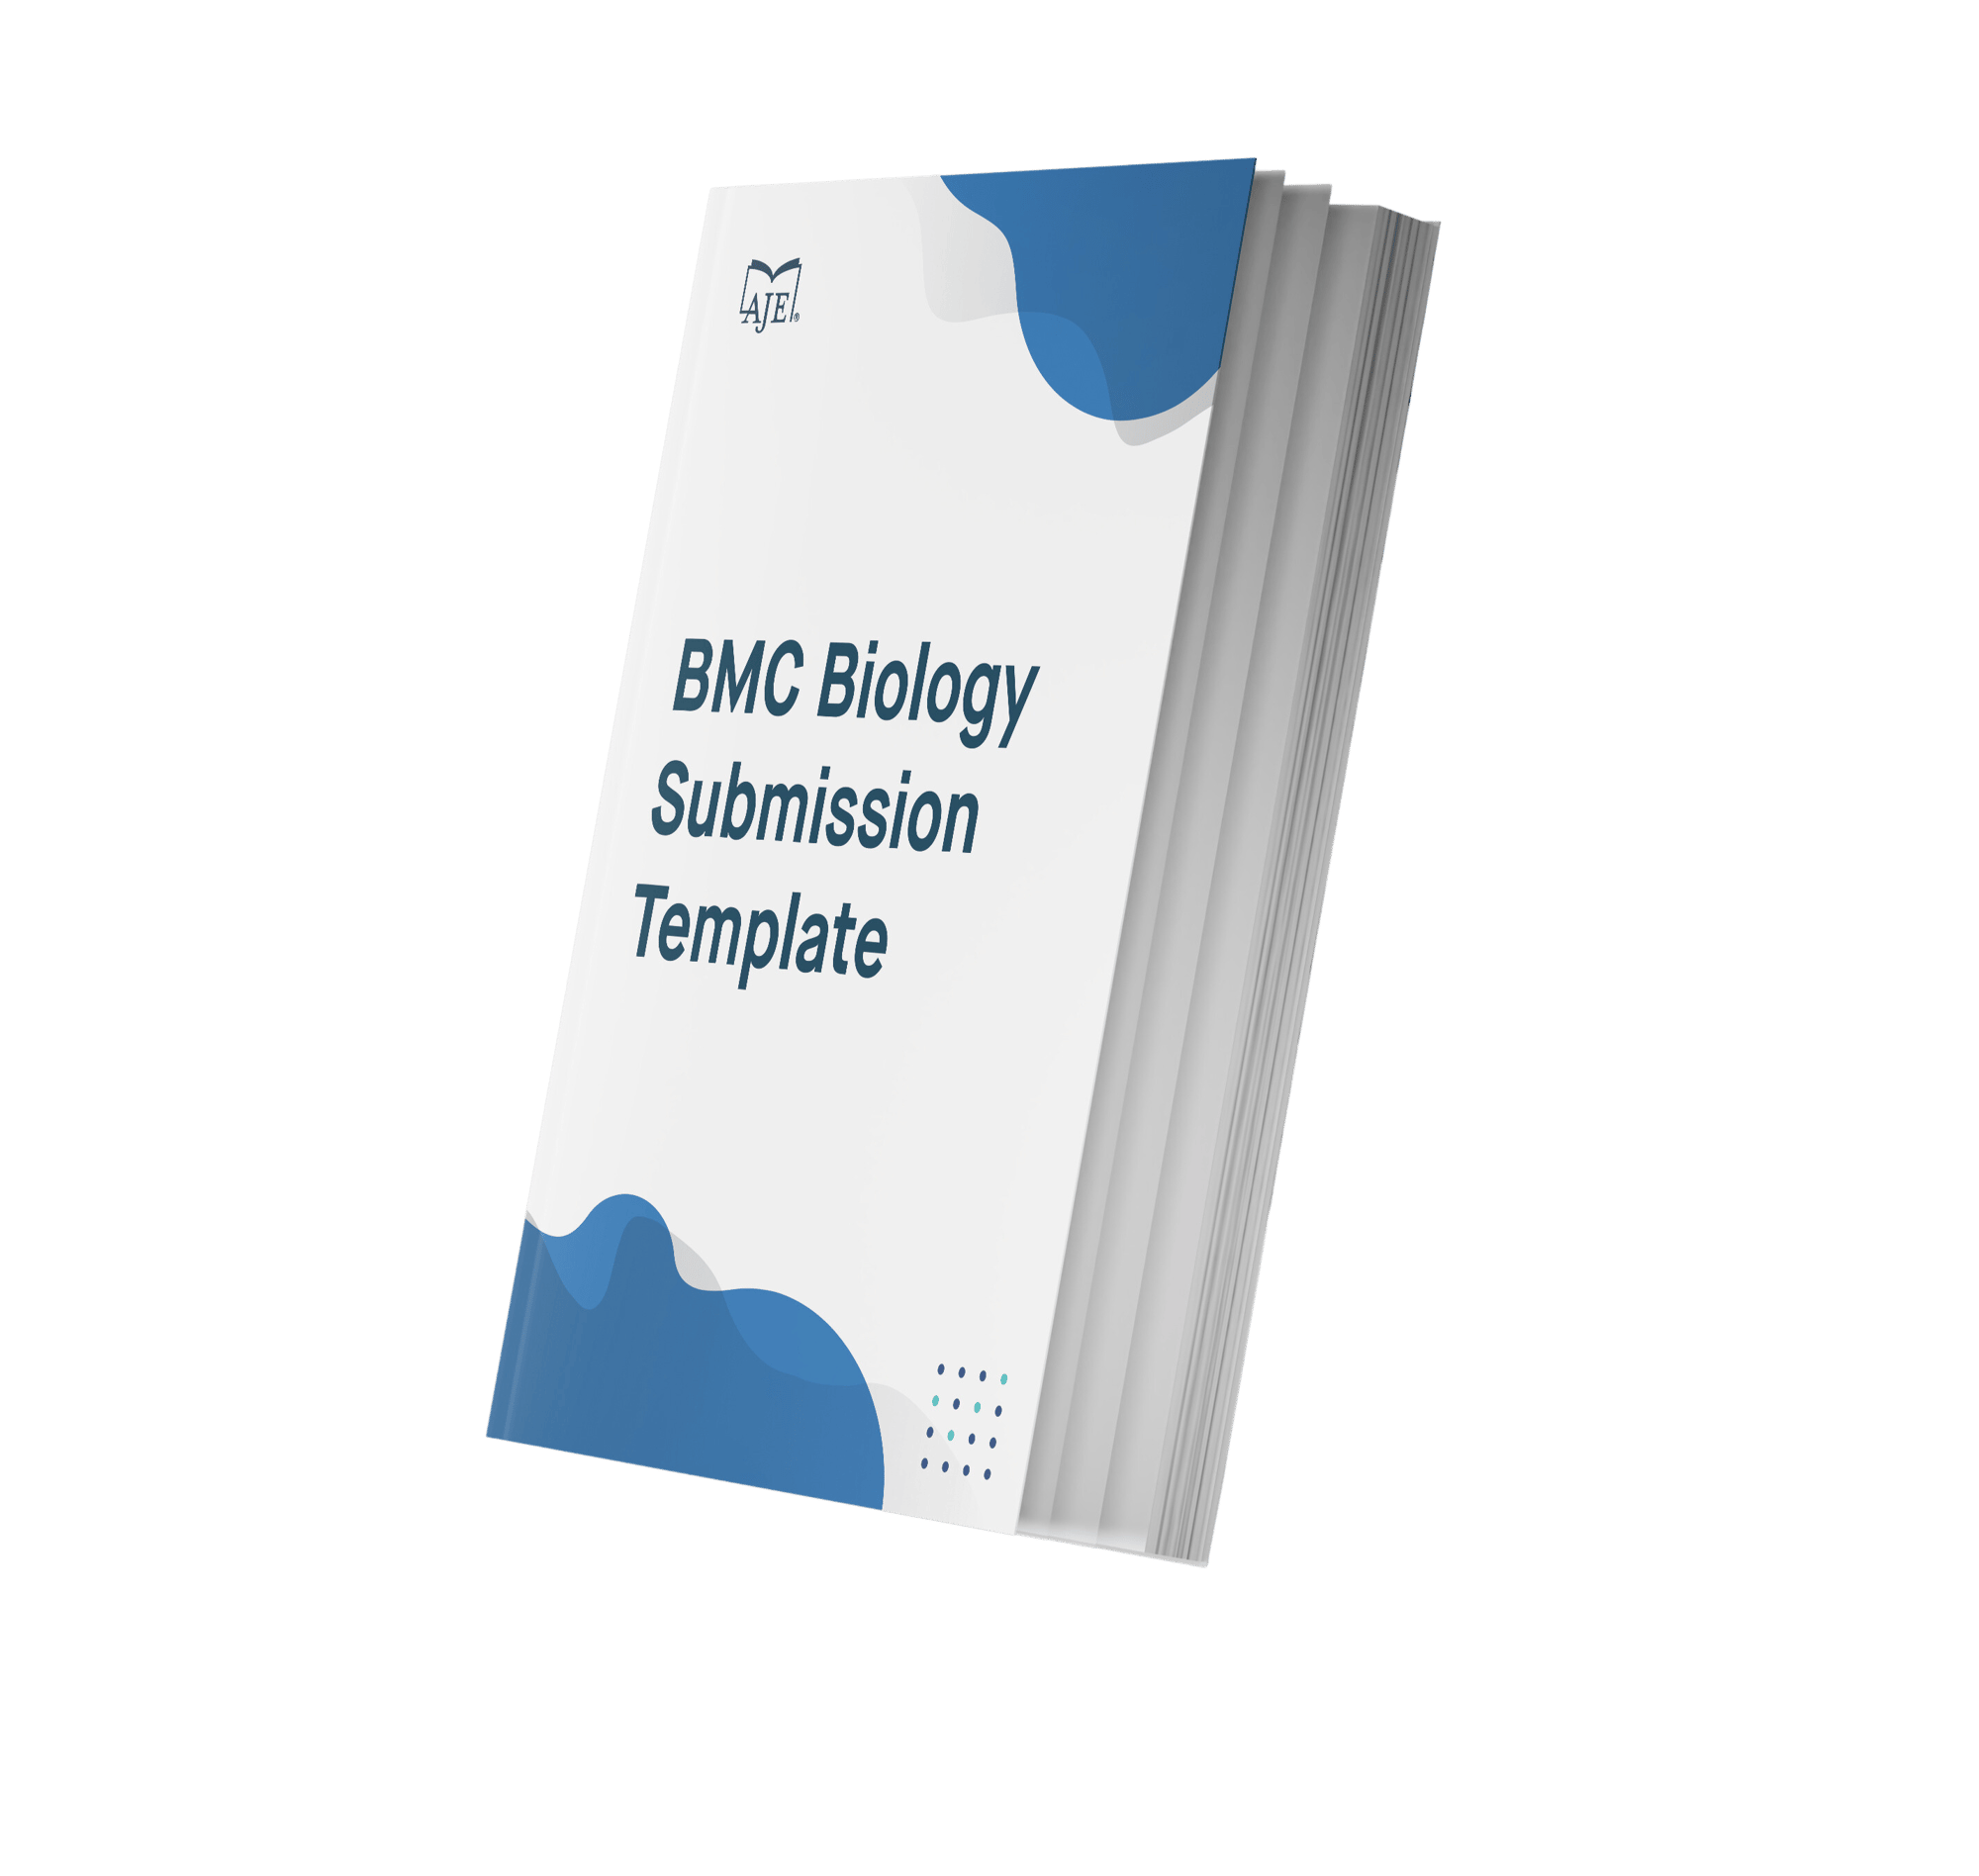 BMC Biology Submission Template - no shadow